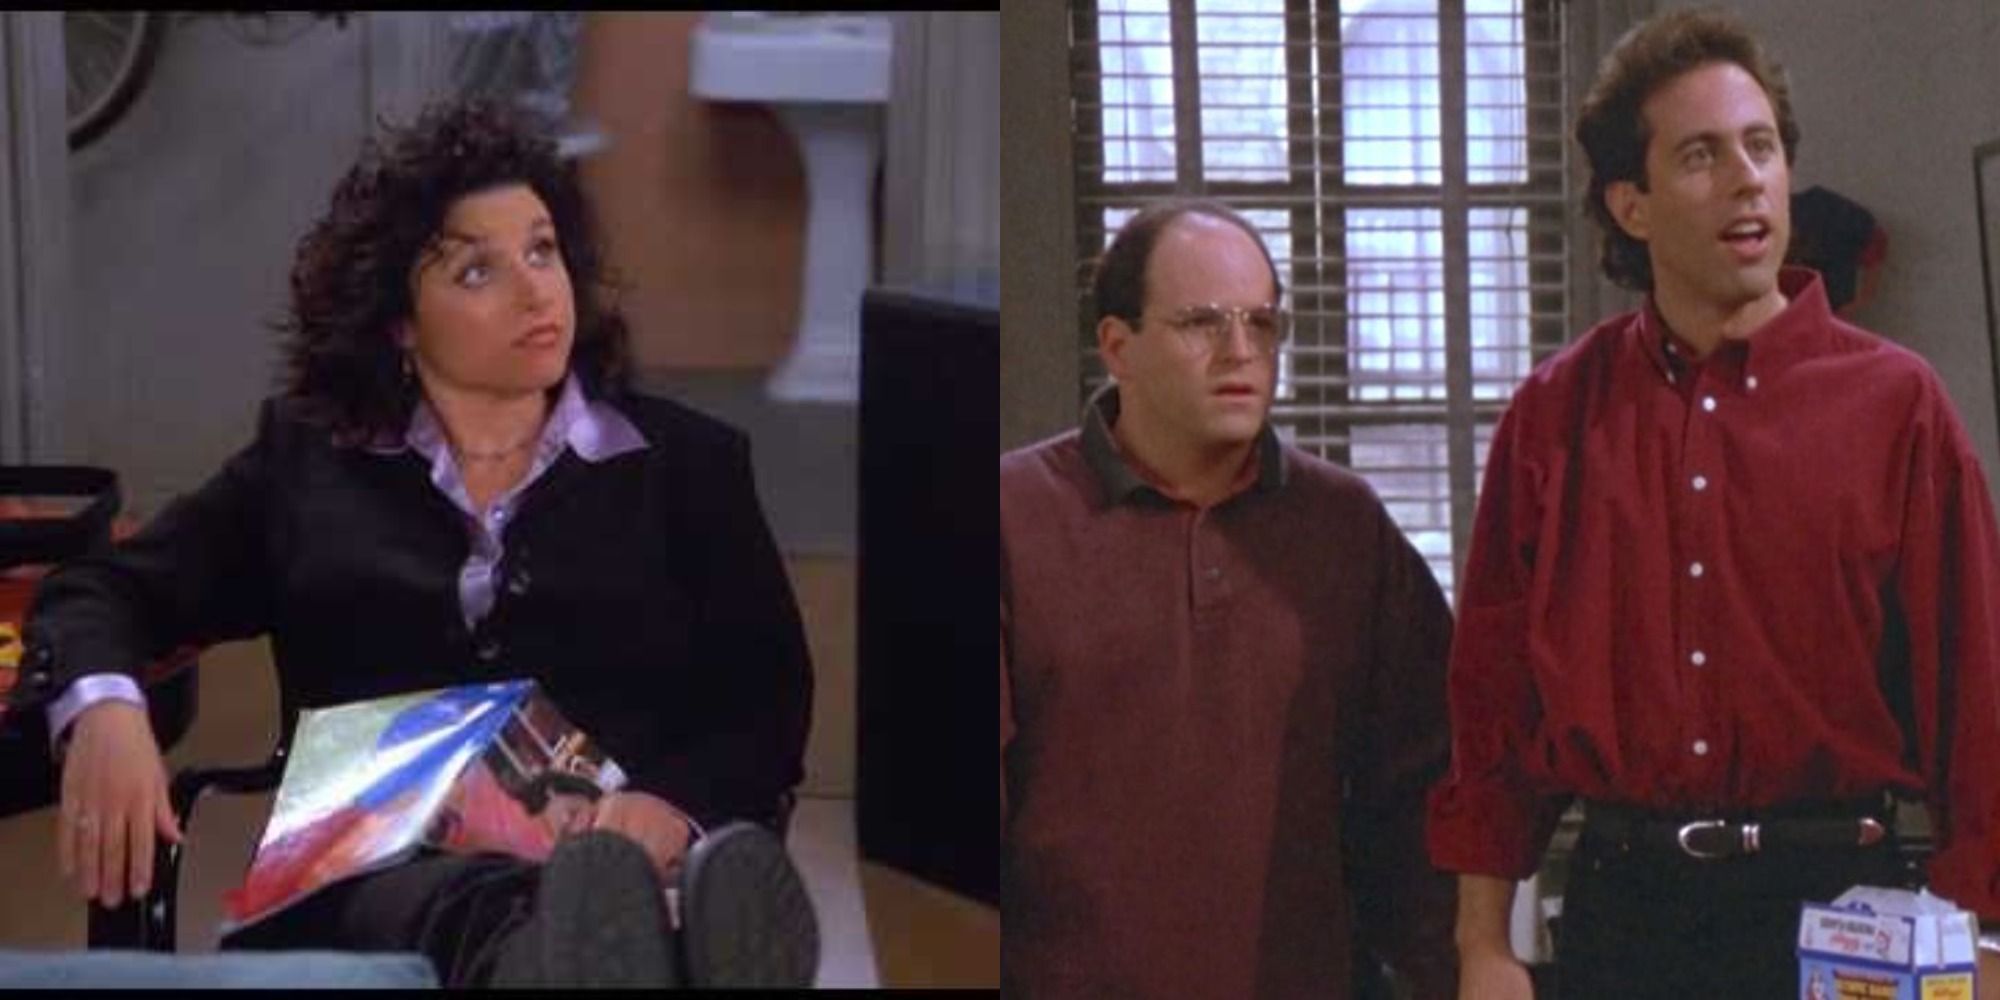 Two-side-by-side-images-of-Elaine-in-the-Yada-Yada-and-George-and-Jerry-in-The-Contest-eps-of-Seinfeld.jpg